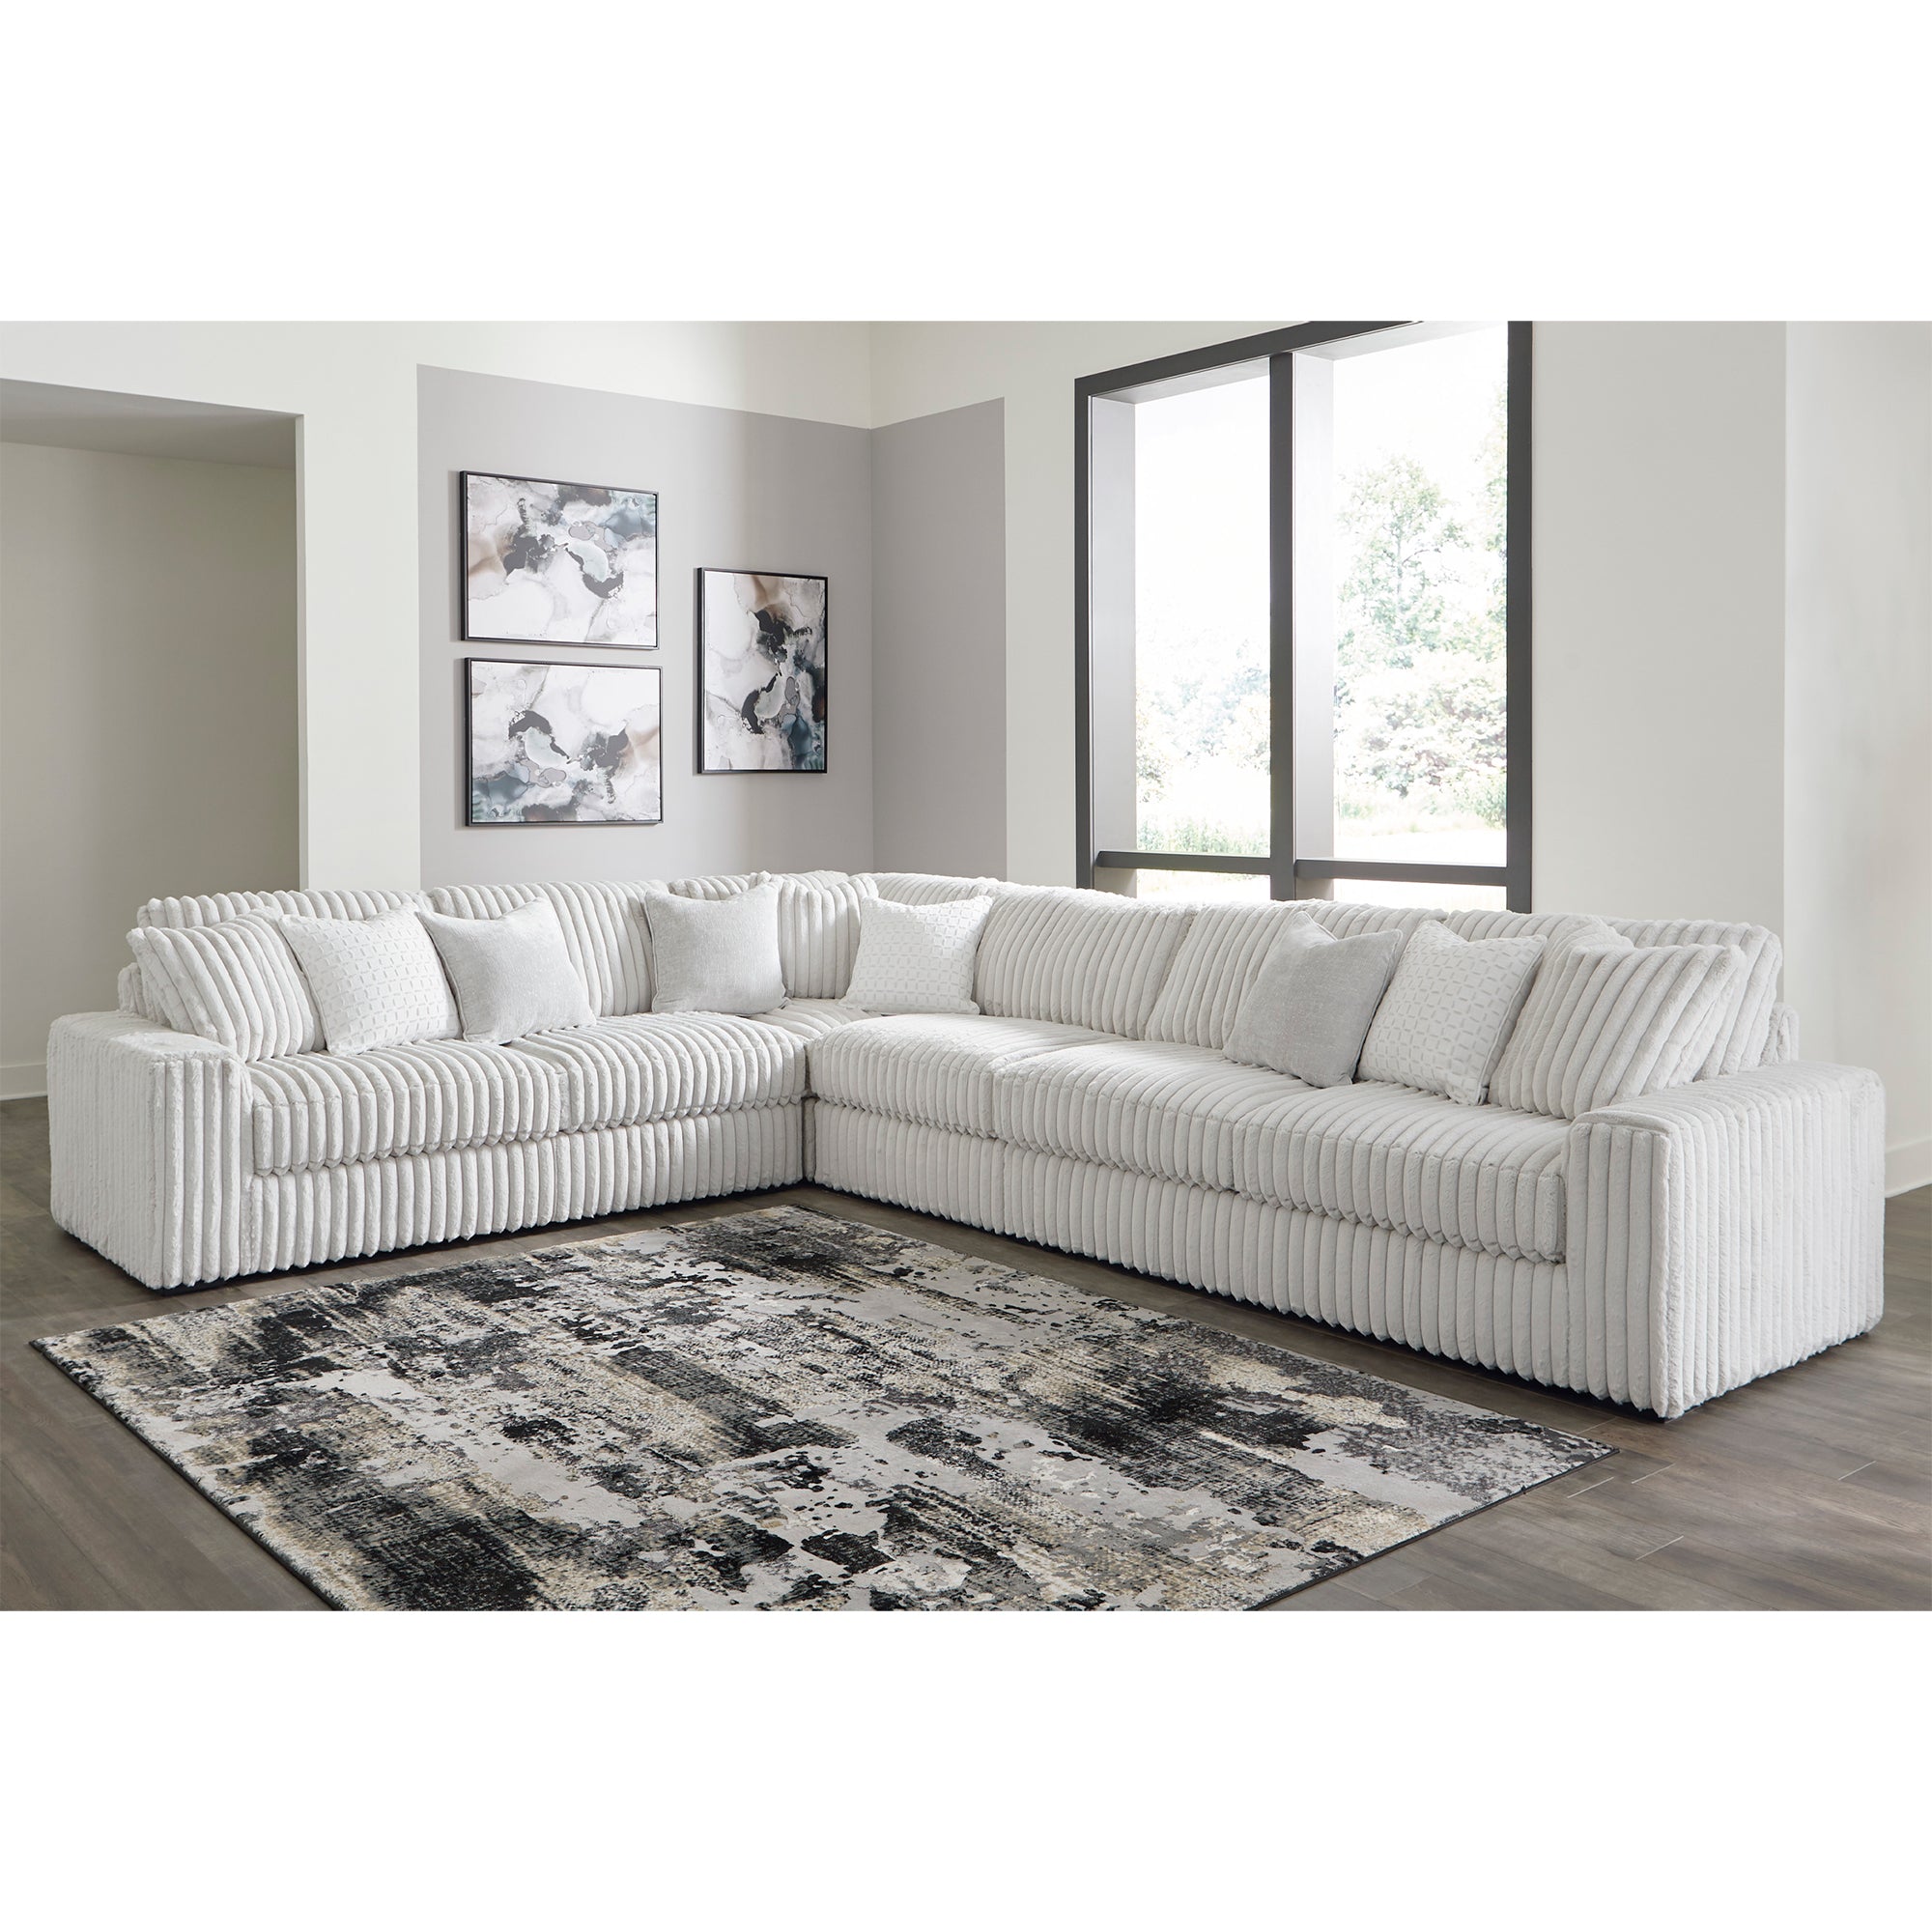 Contemporary 4-Piece Stupendous Sectional with high-resiliency foam cushions, offers long-lasting support and comfort